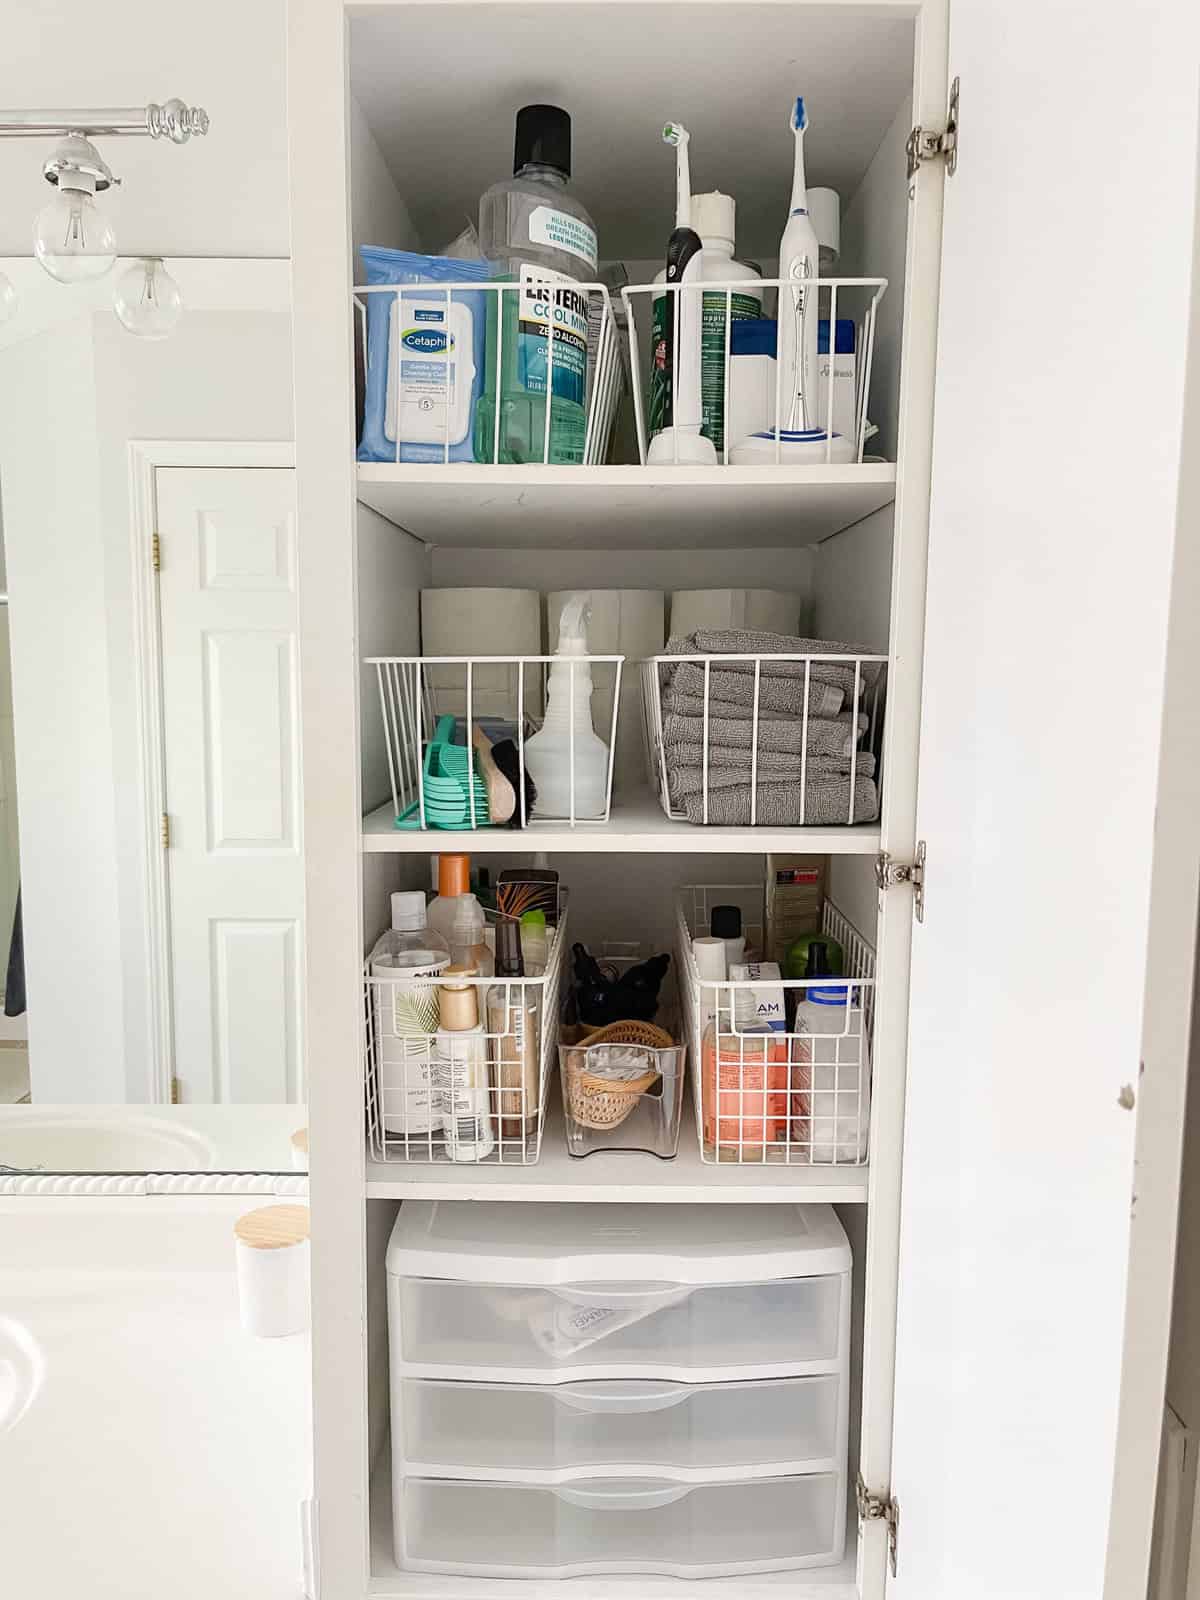 Organizing Bathroom Cabinets amazon containers